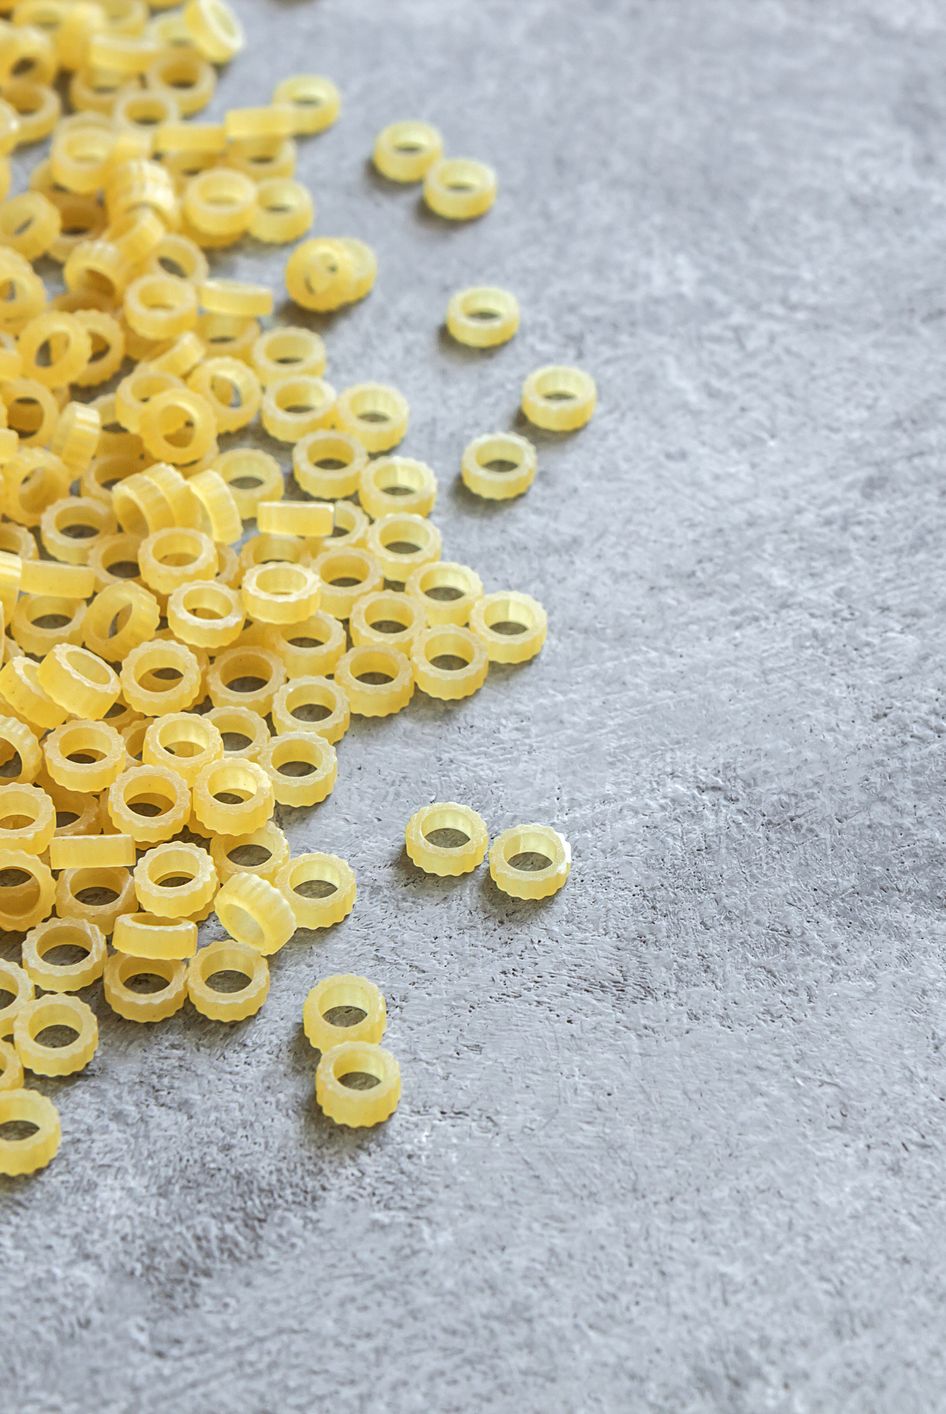 51 Types Of Pasta From A to Z (With Photos!)